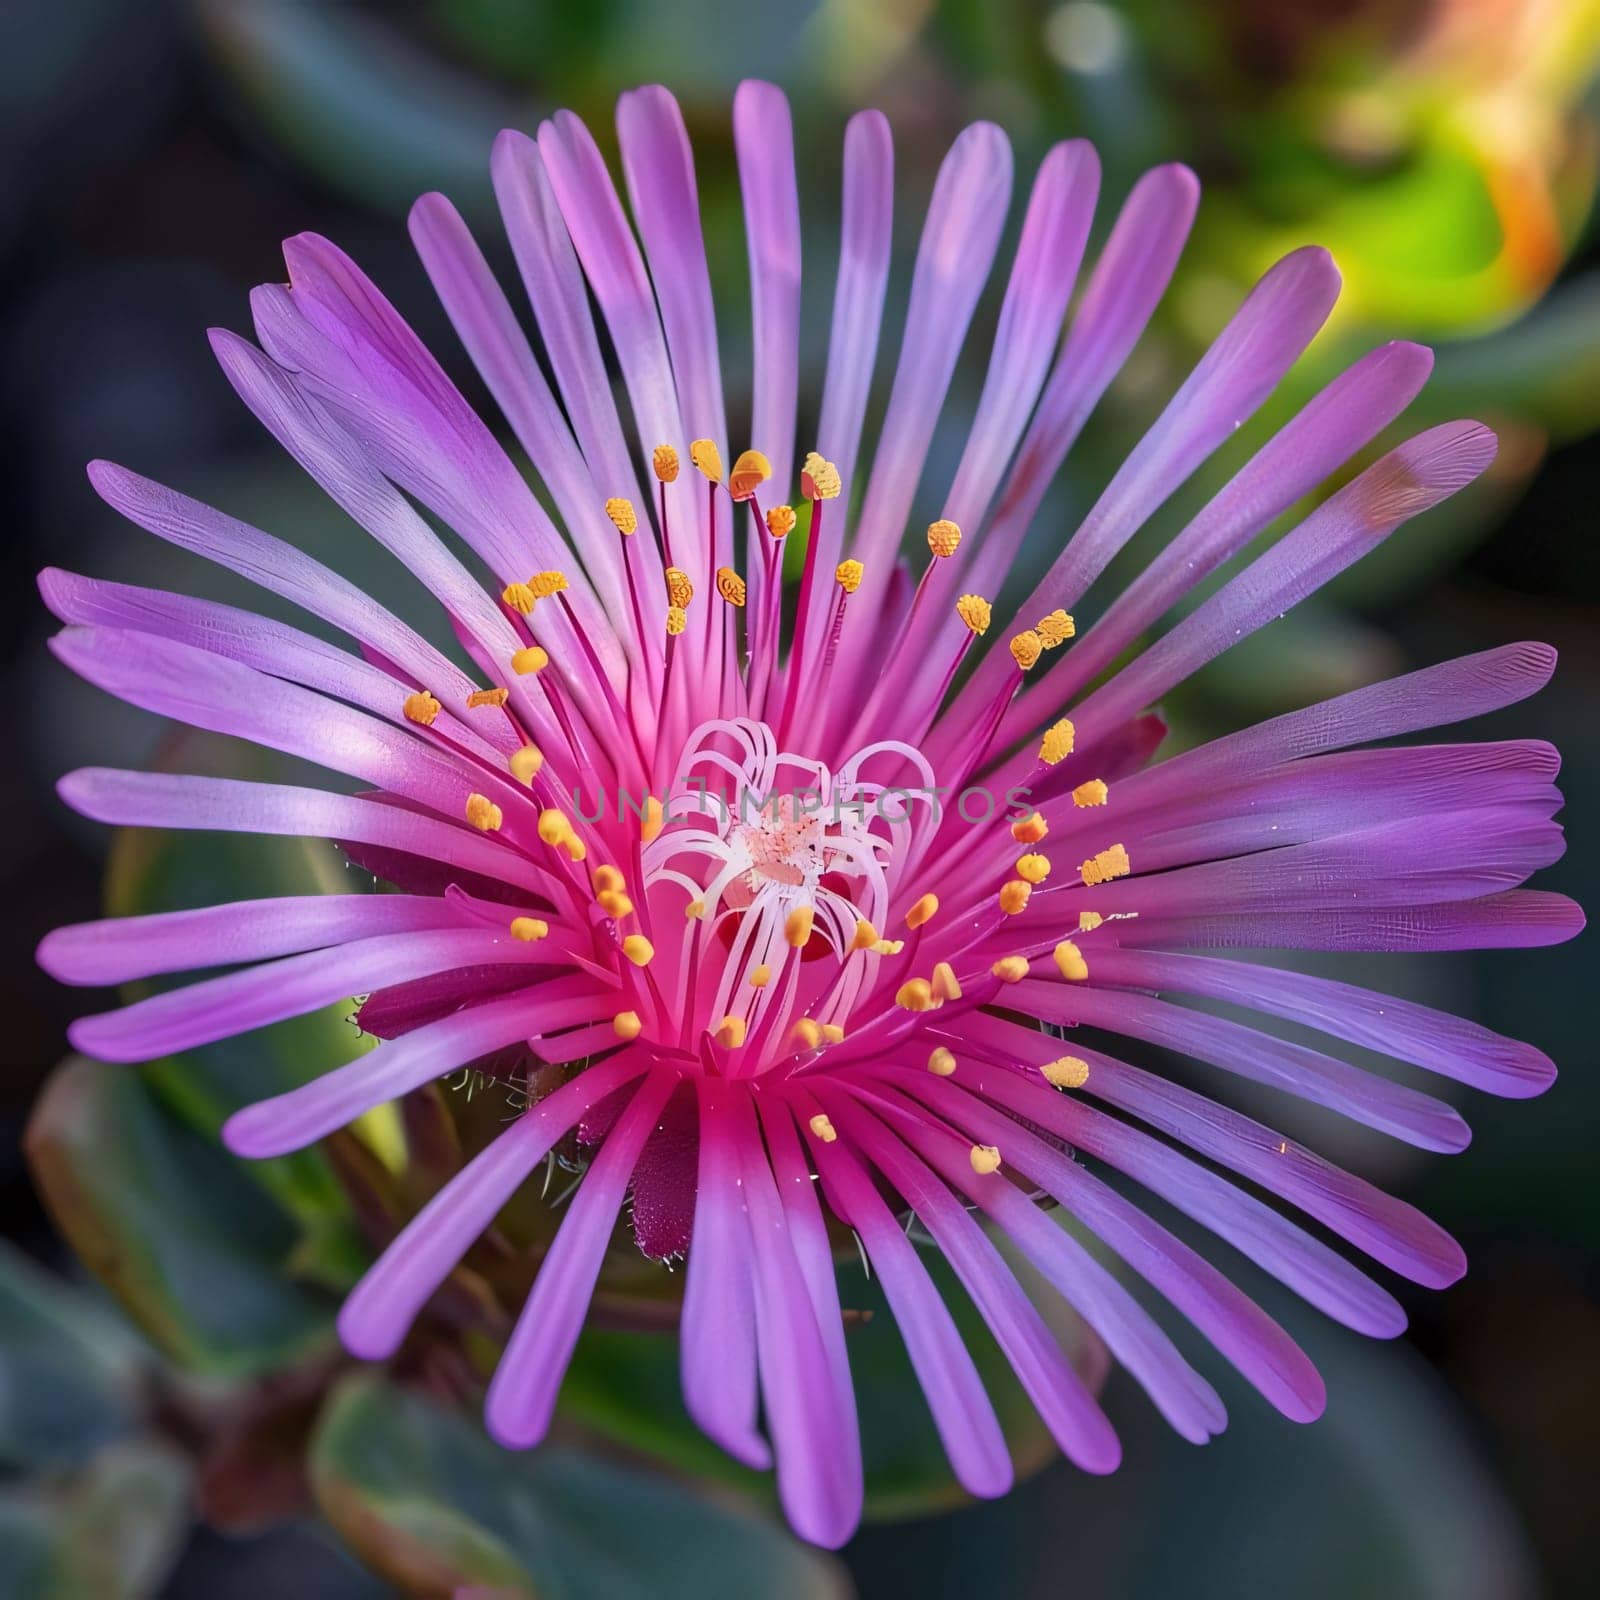 Pink trailing iceplant close-up photo. Flowering flowers, a symbol of spring, new life. A joyful time of nature waking up to life.